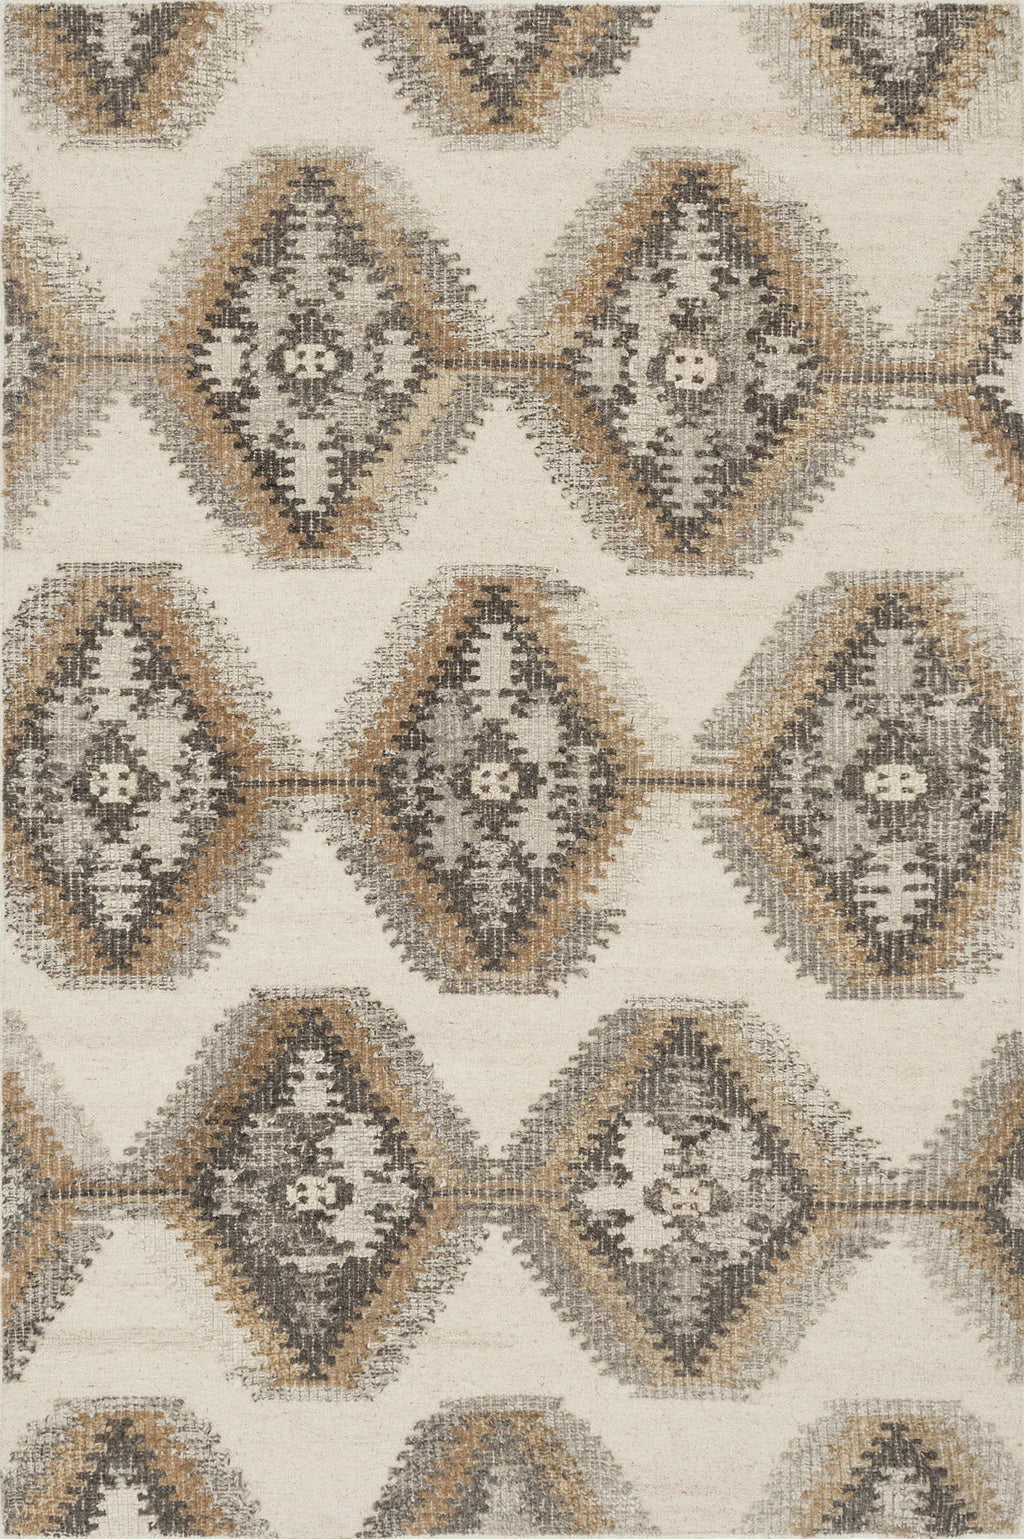 AKINA Collection Wool Rug  in  IVORY / CAMEL Ivory Small Hand-Woven Wool